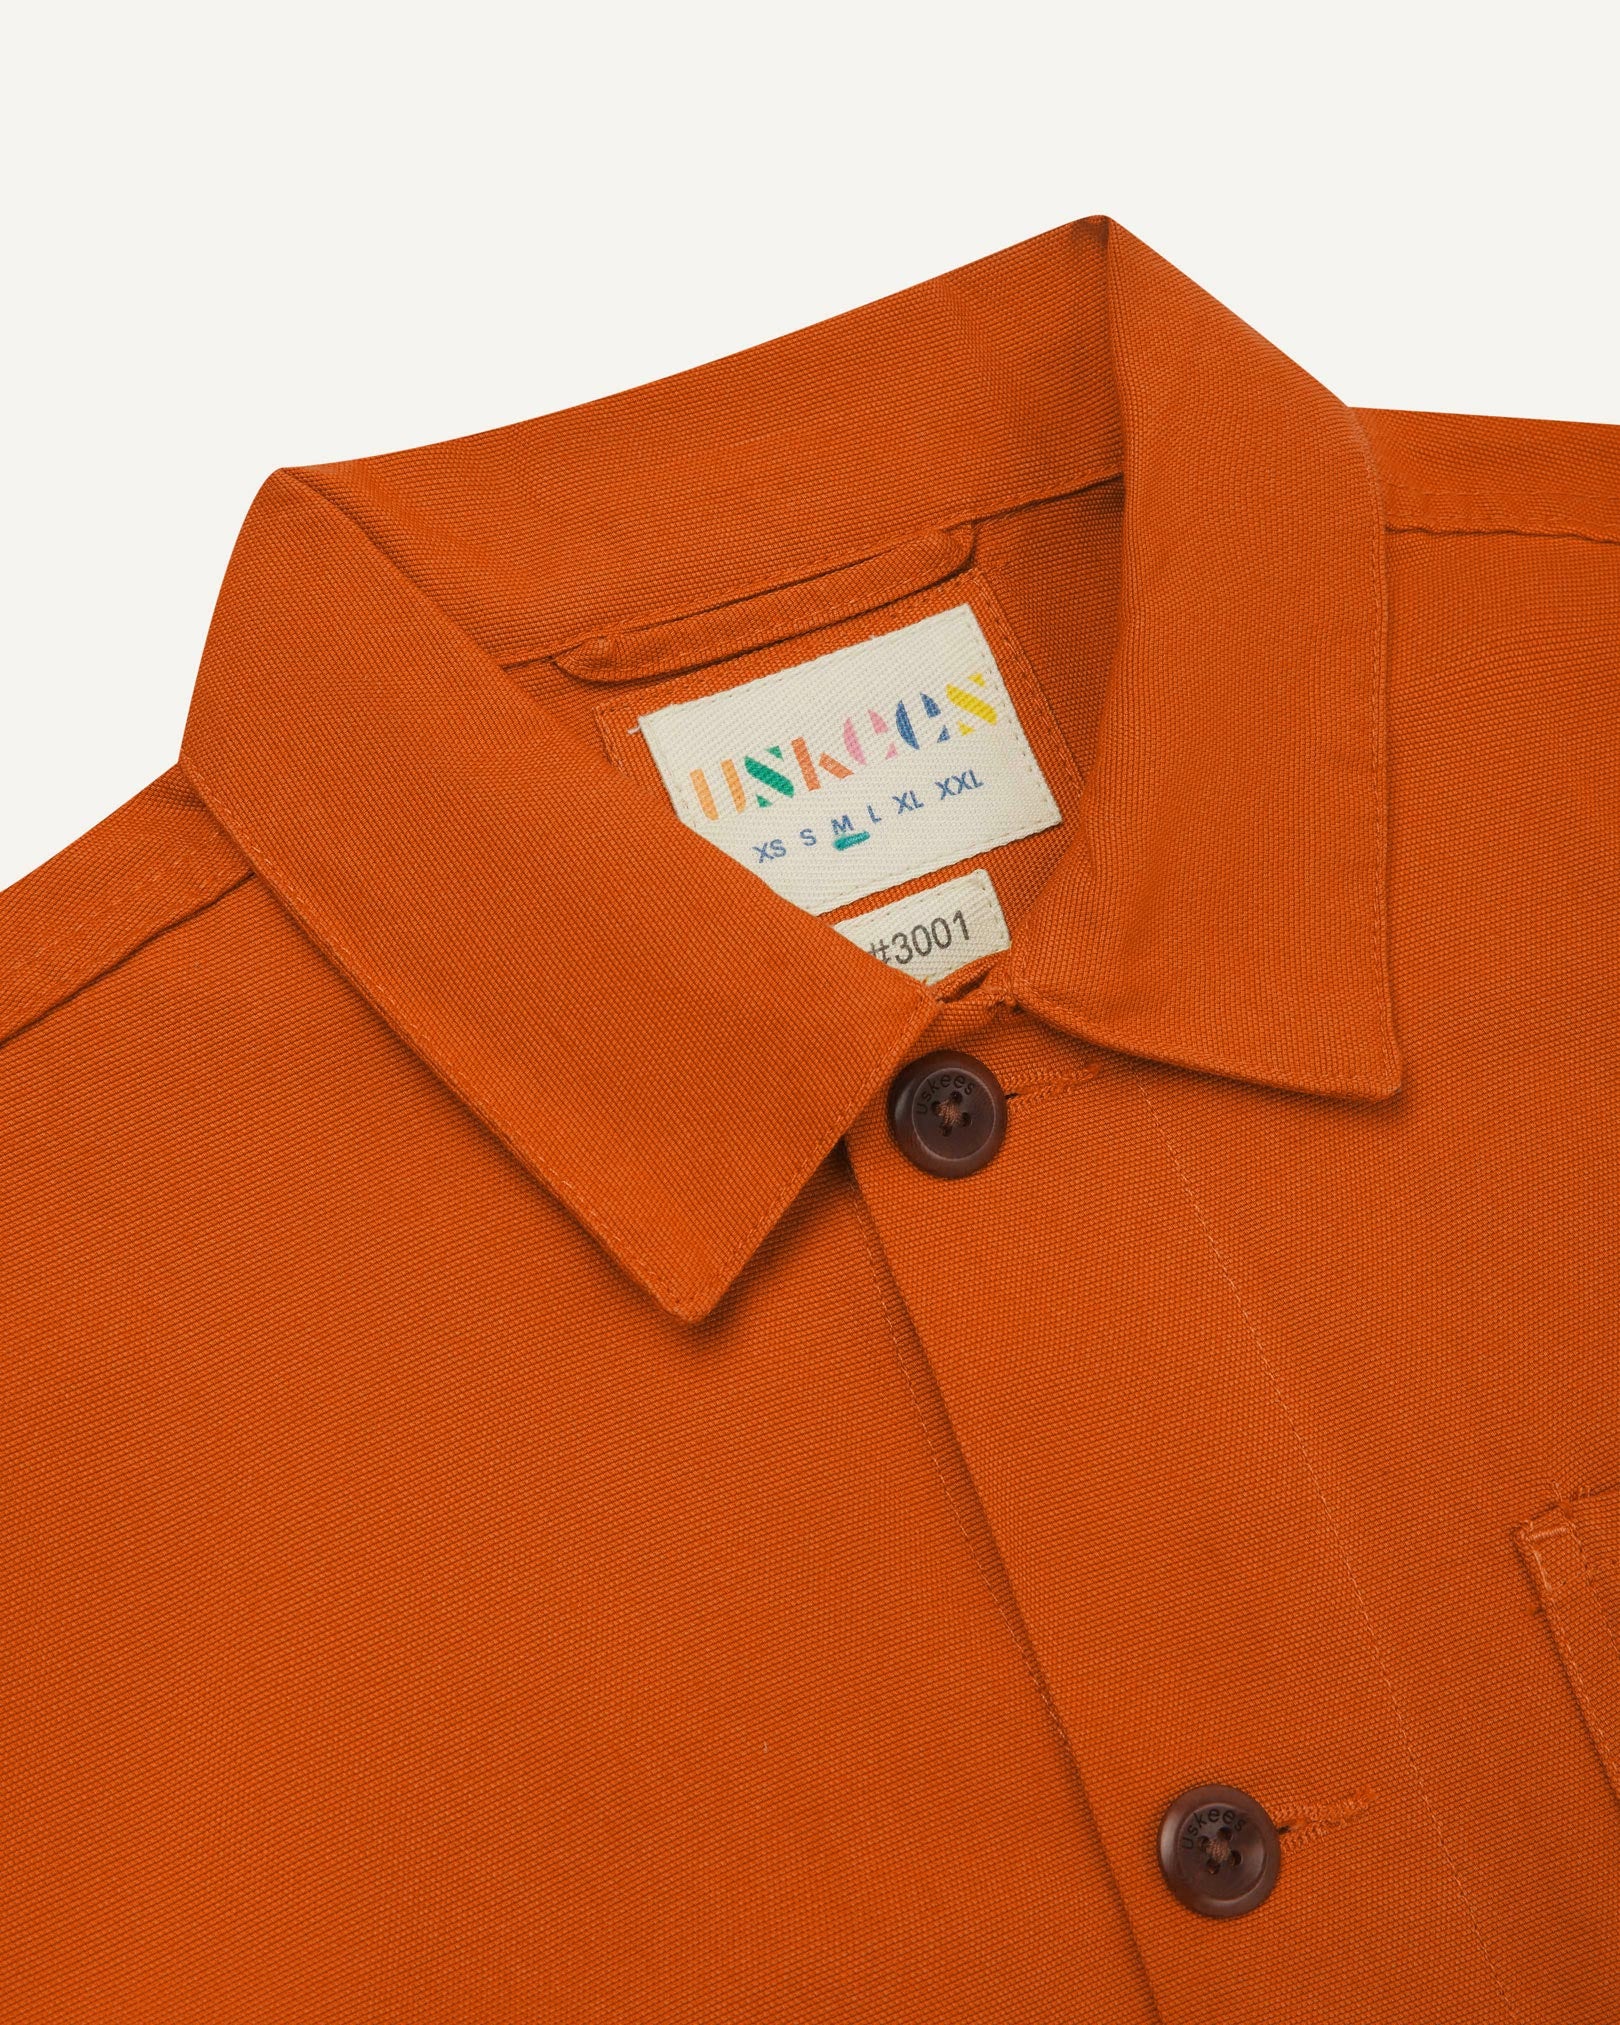 Close-up view of 3001 golden-orange, buttoned organic cotton overshirt from Uskees showing corozo buttons, brand label, collar and hanging hoop.